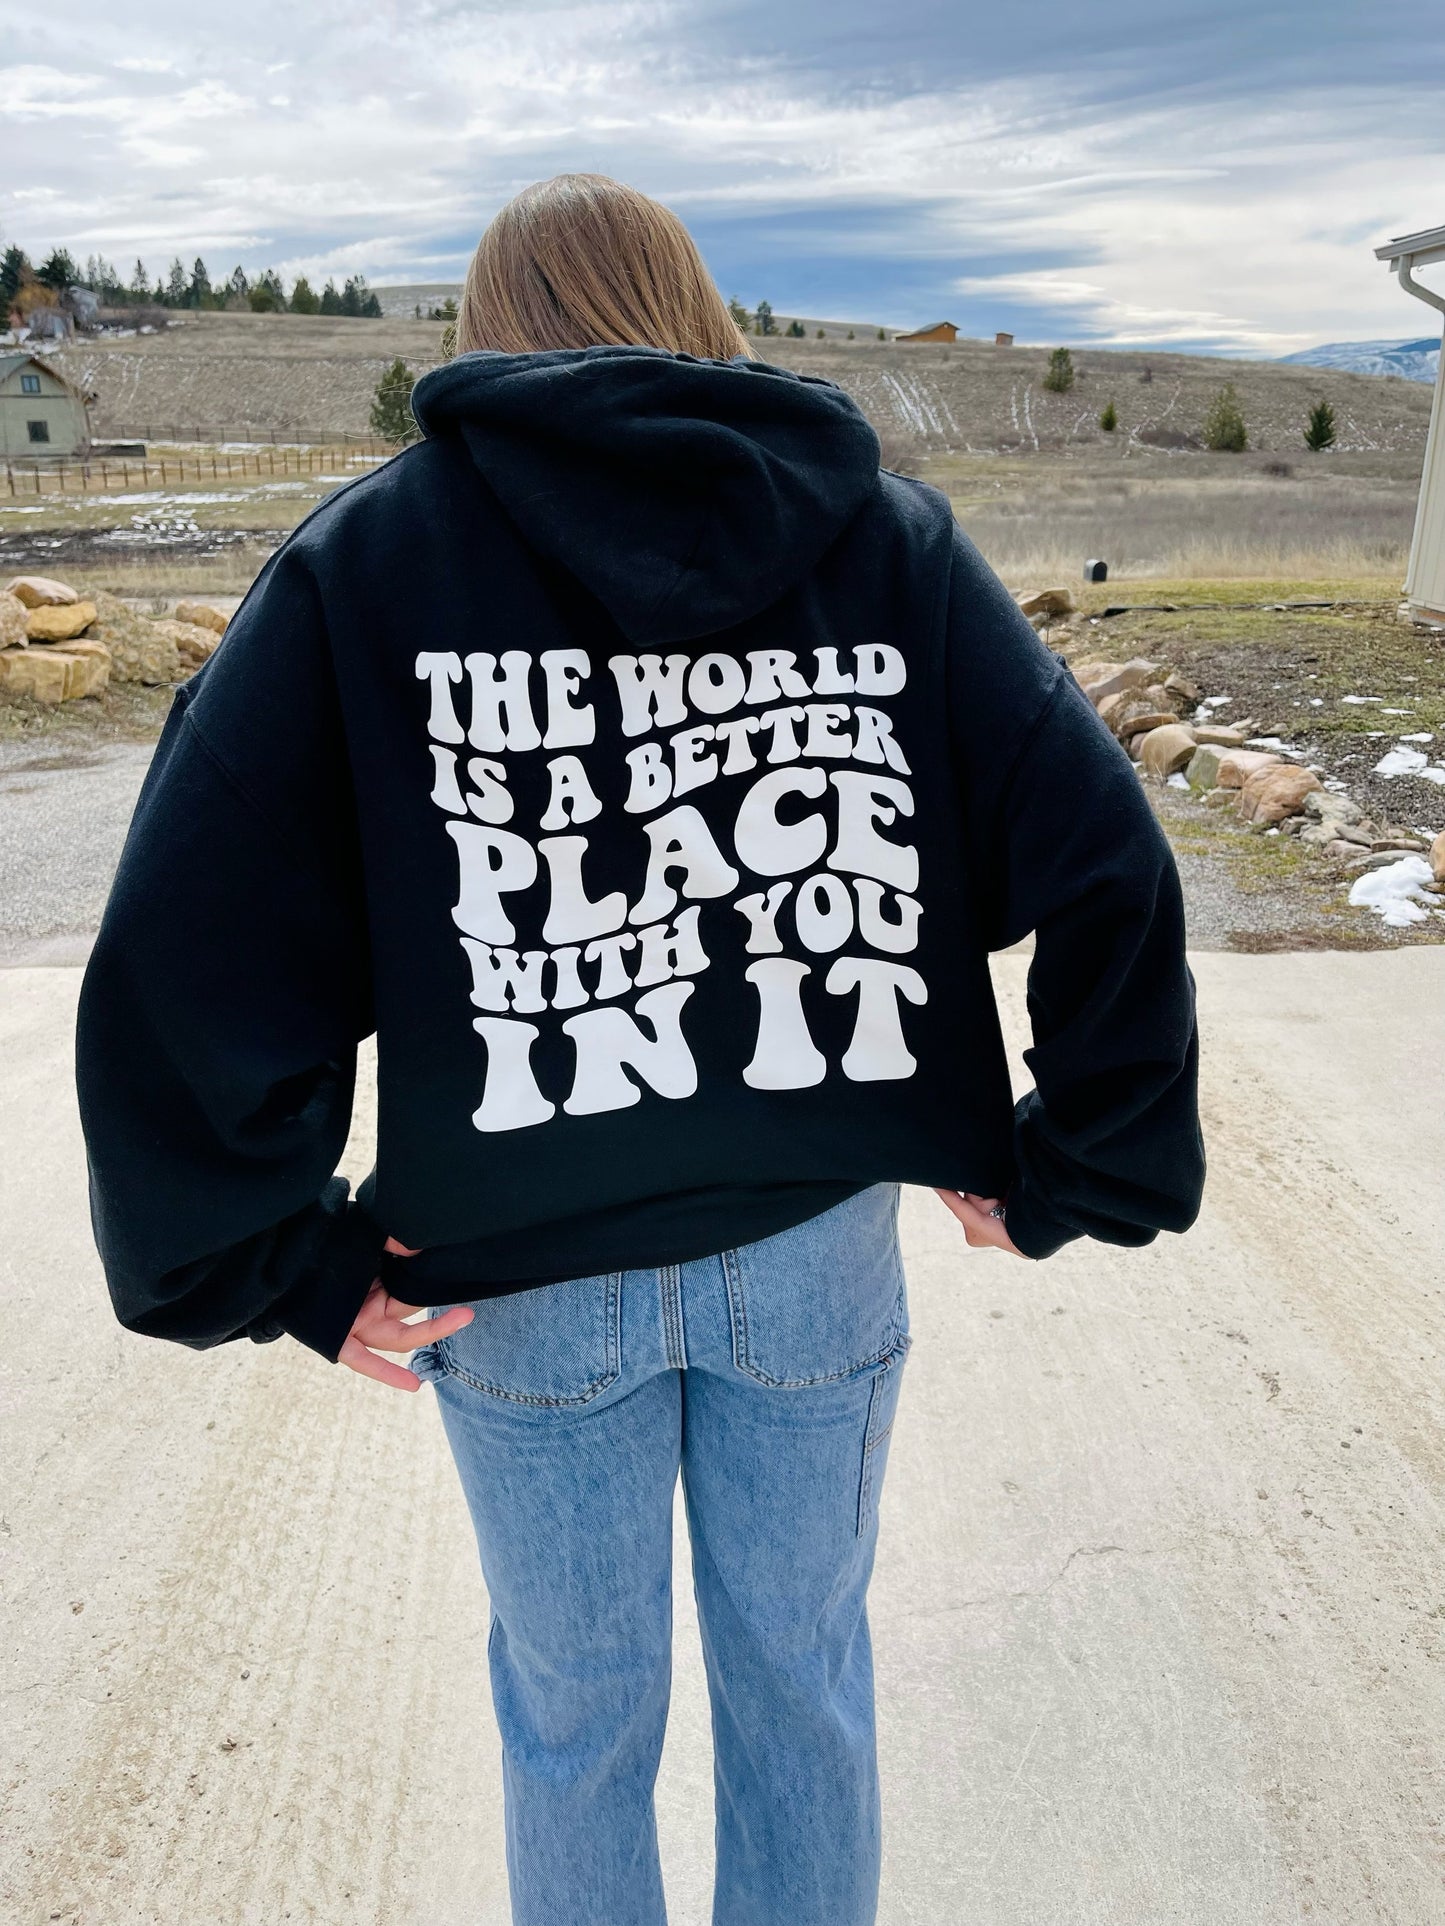 "The World Is A Better Place With You In It" Hoodie